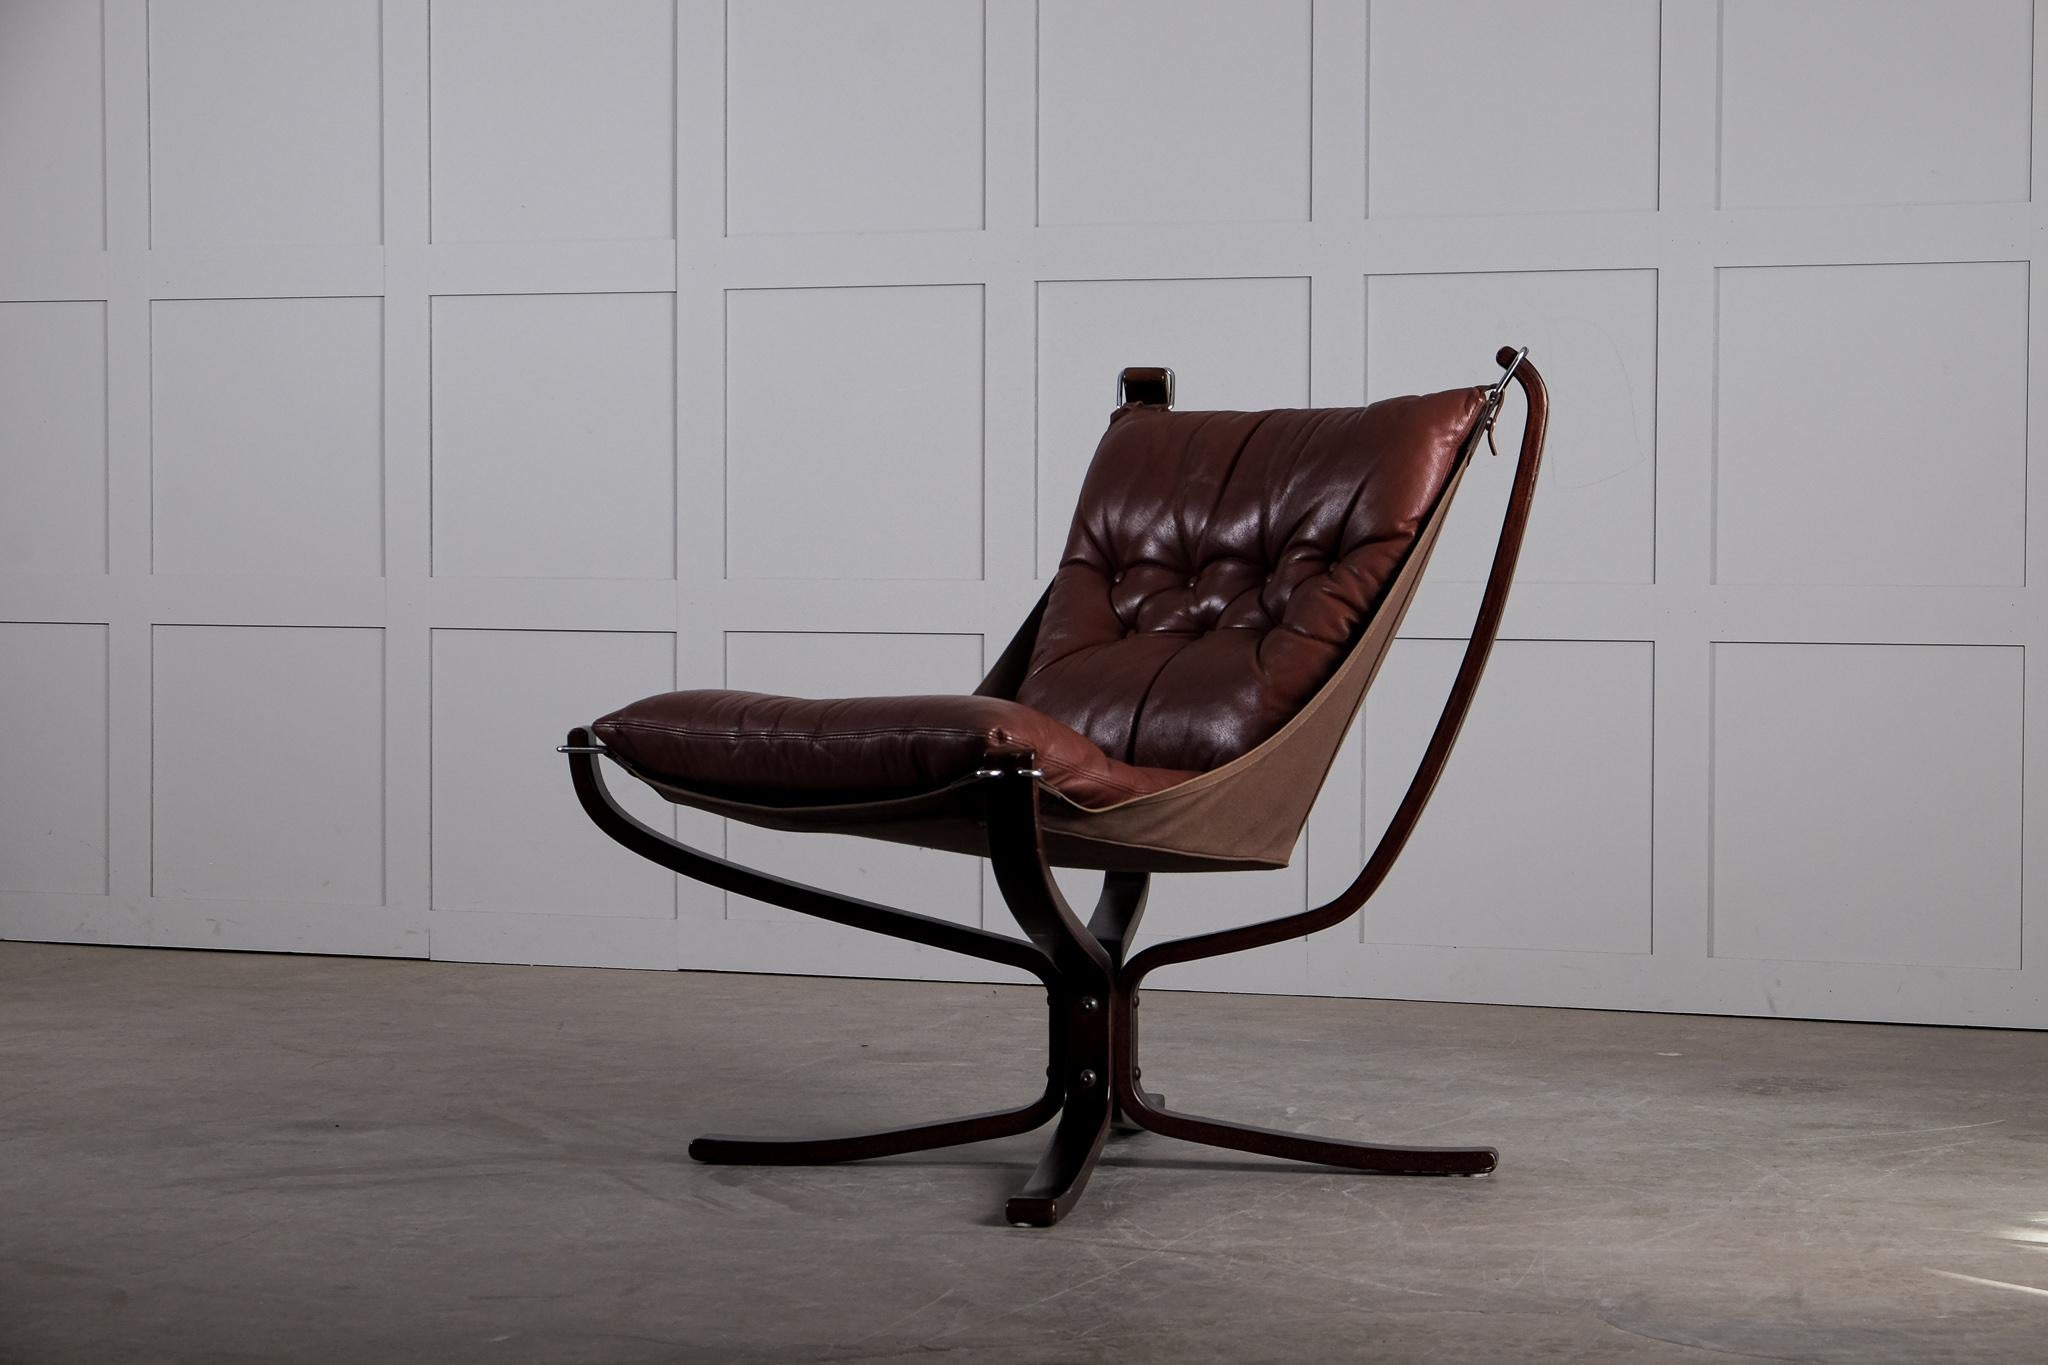 Norwegian Falcon chair in brown leather by Sigurd Ressel, Norway, 1970s. Very good vintage condition with signs of usage and patina.
 